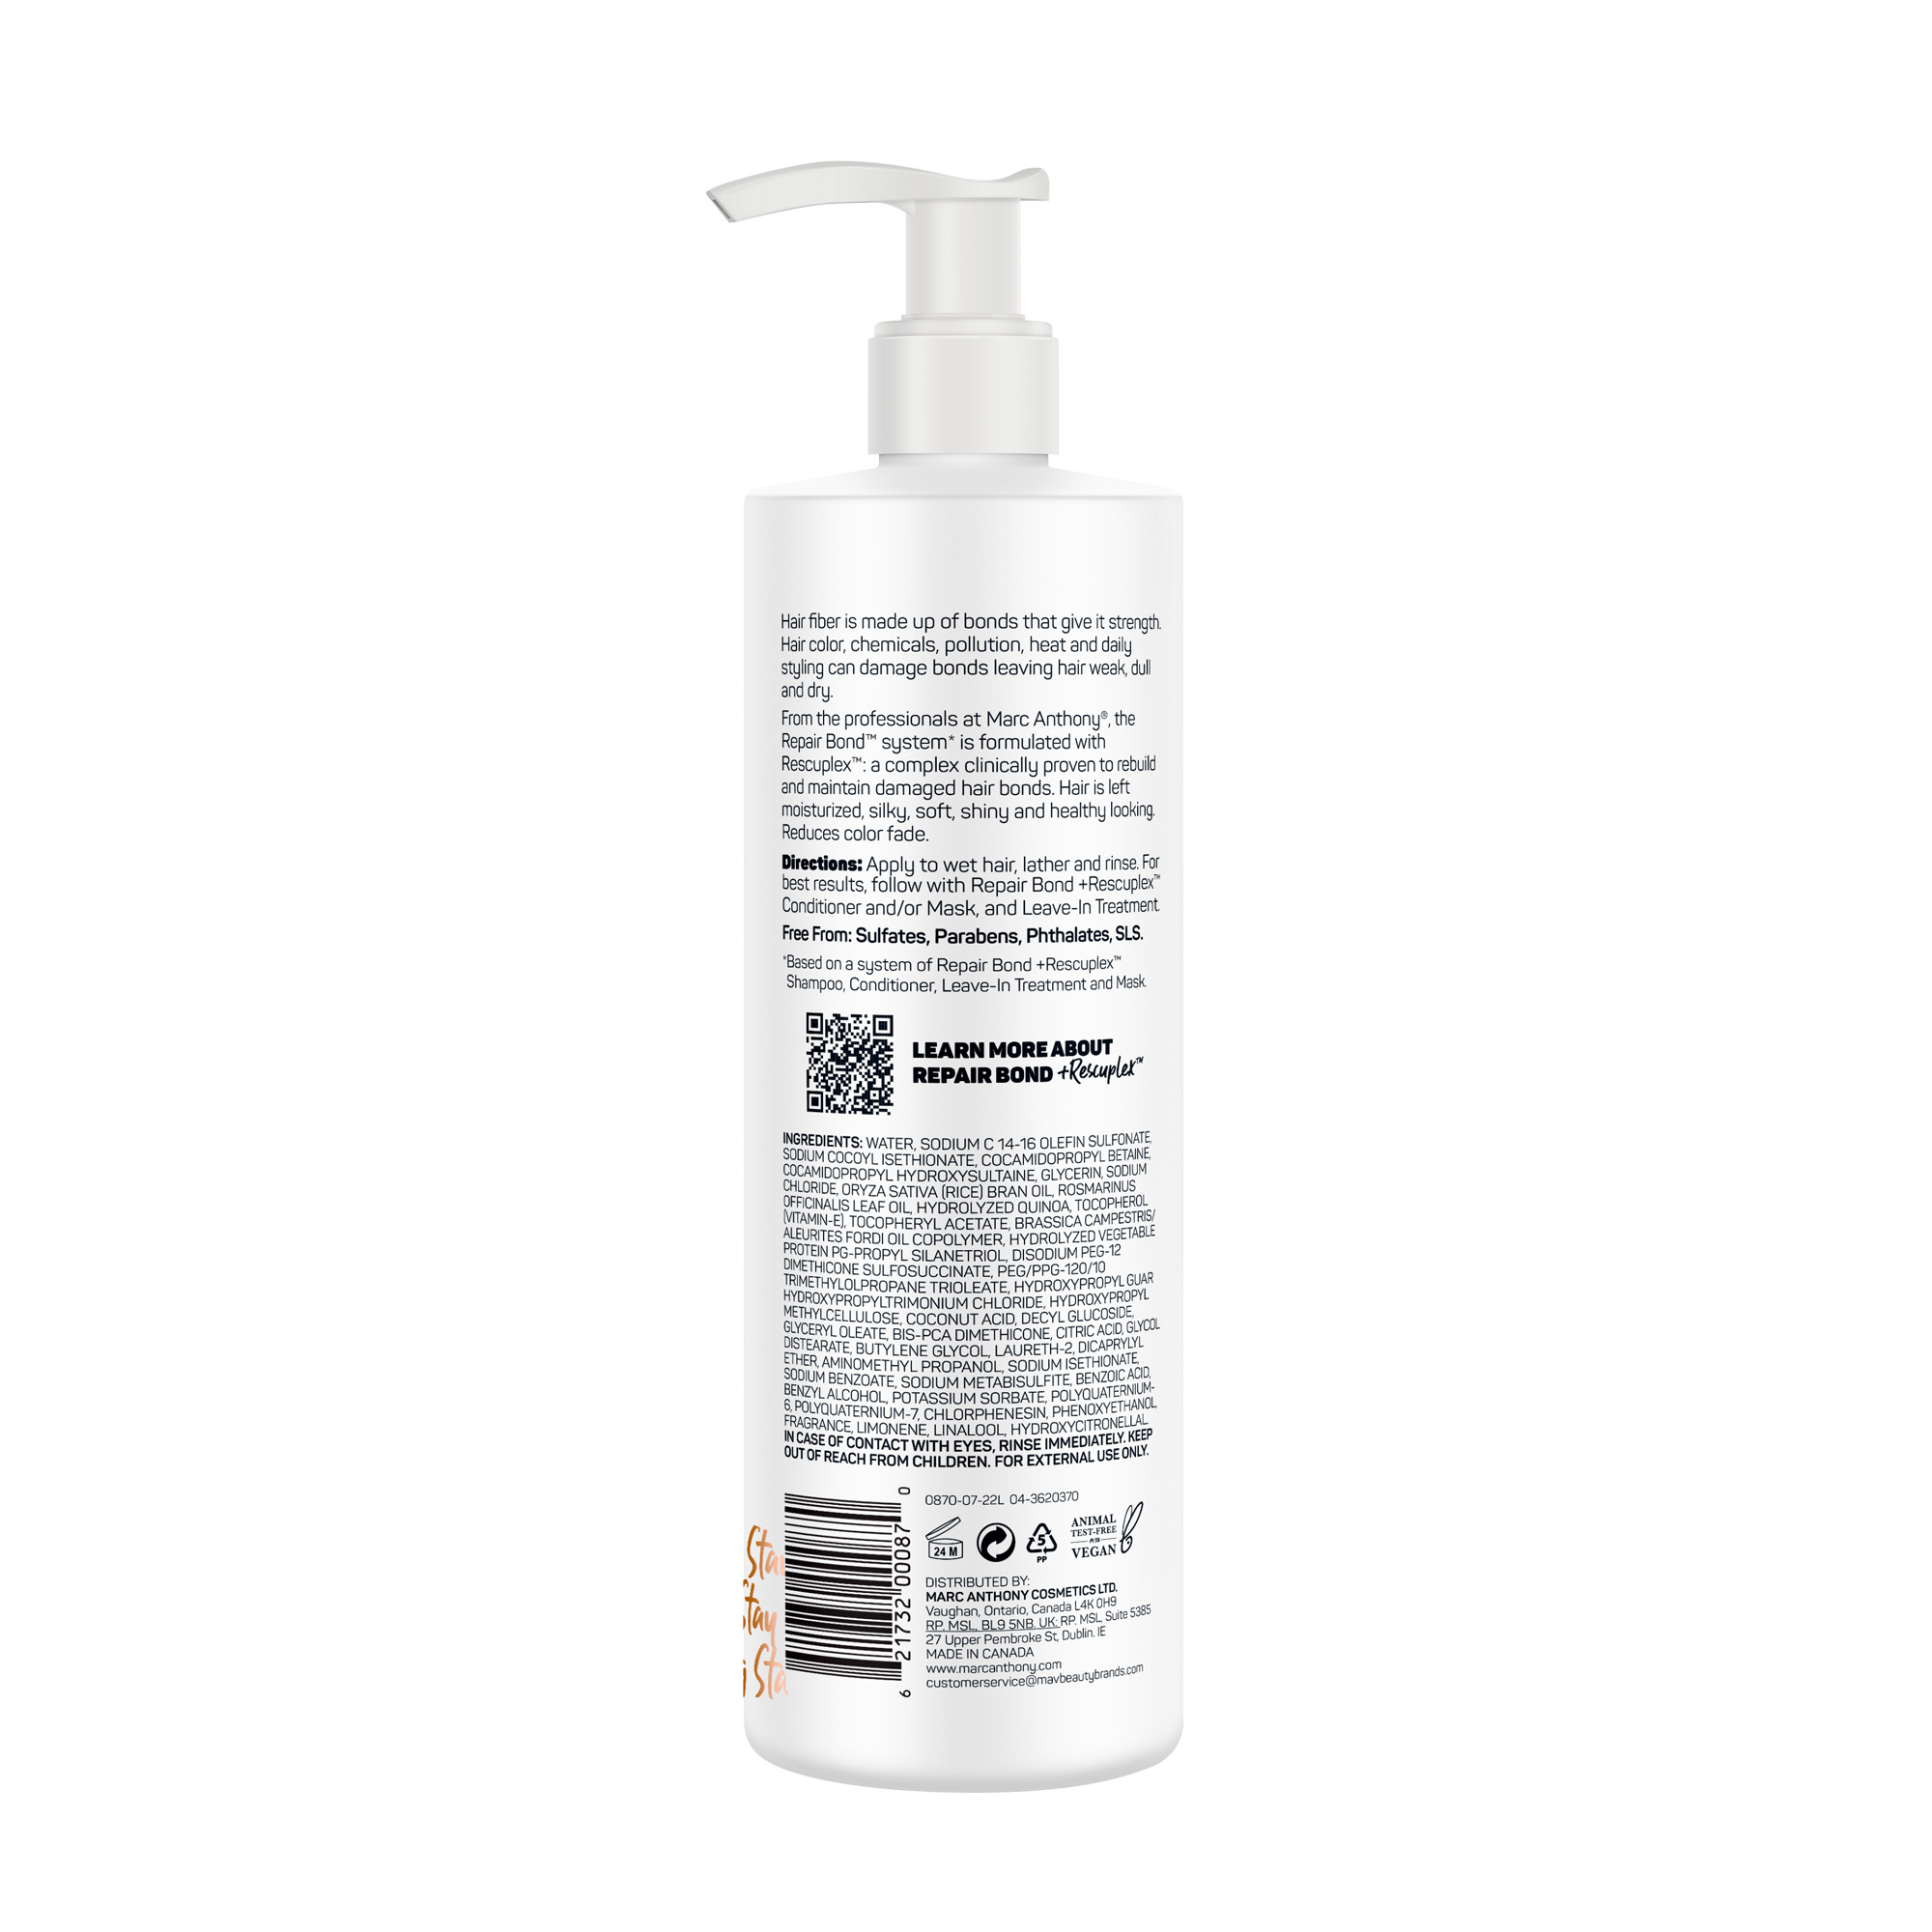 Marc Anthony Repair Bond Plus Rescuplex Daily Hair Shampoo for All Hair Types, 16 Fluid oz - image 9 of 10